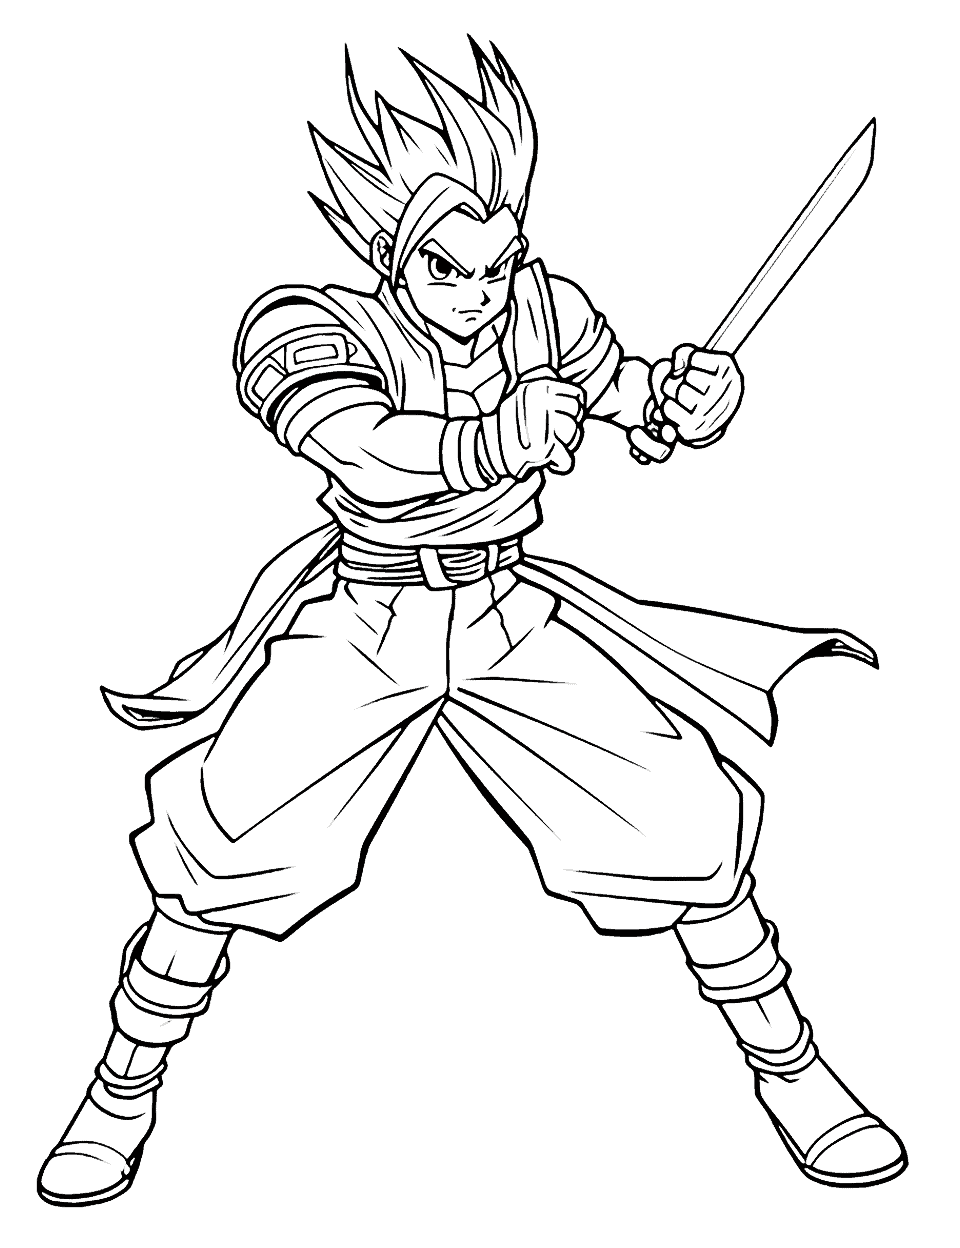 Anime Warrior Coloring Page - A detailed anime warrior standing tall, holding his weapon, ready to face any challenge.